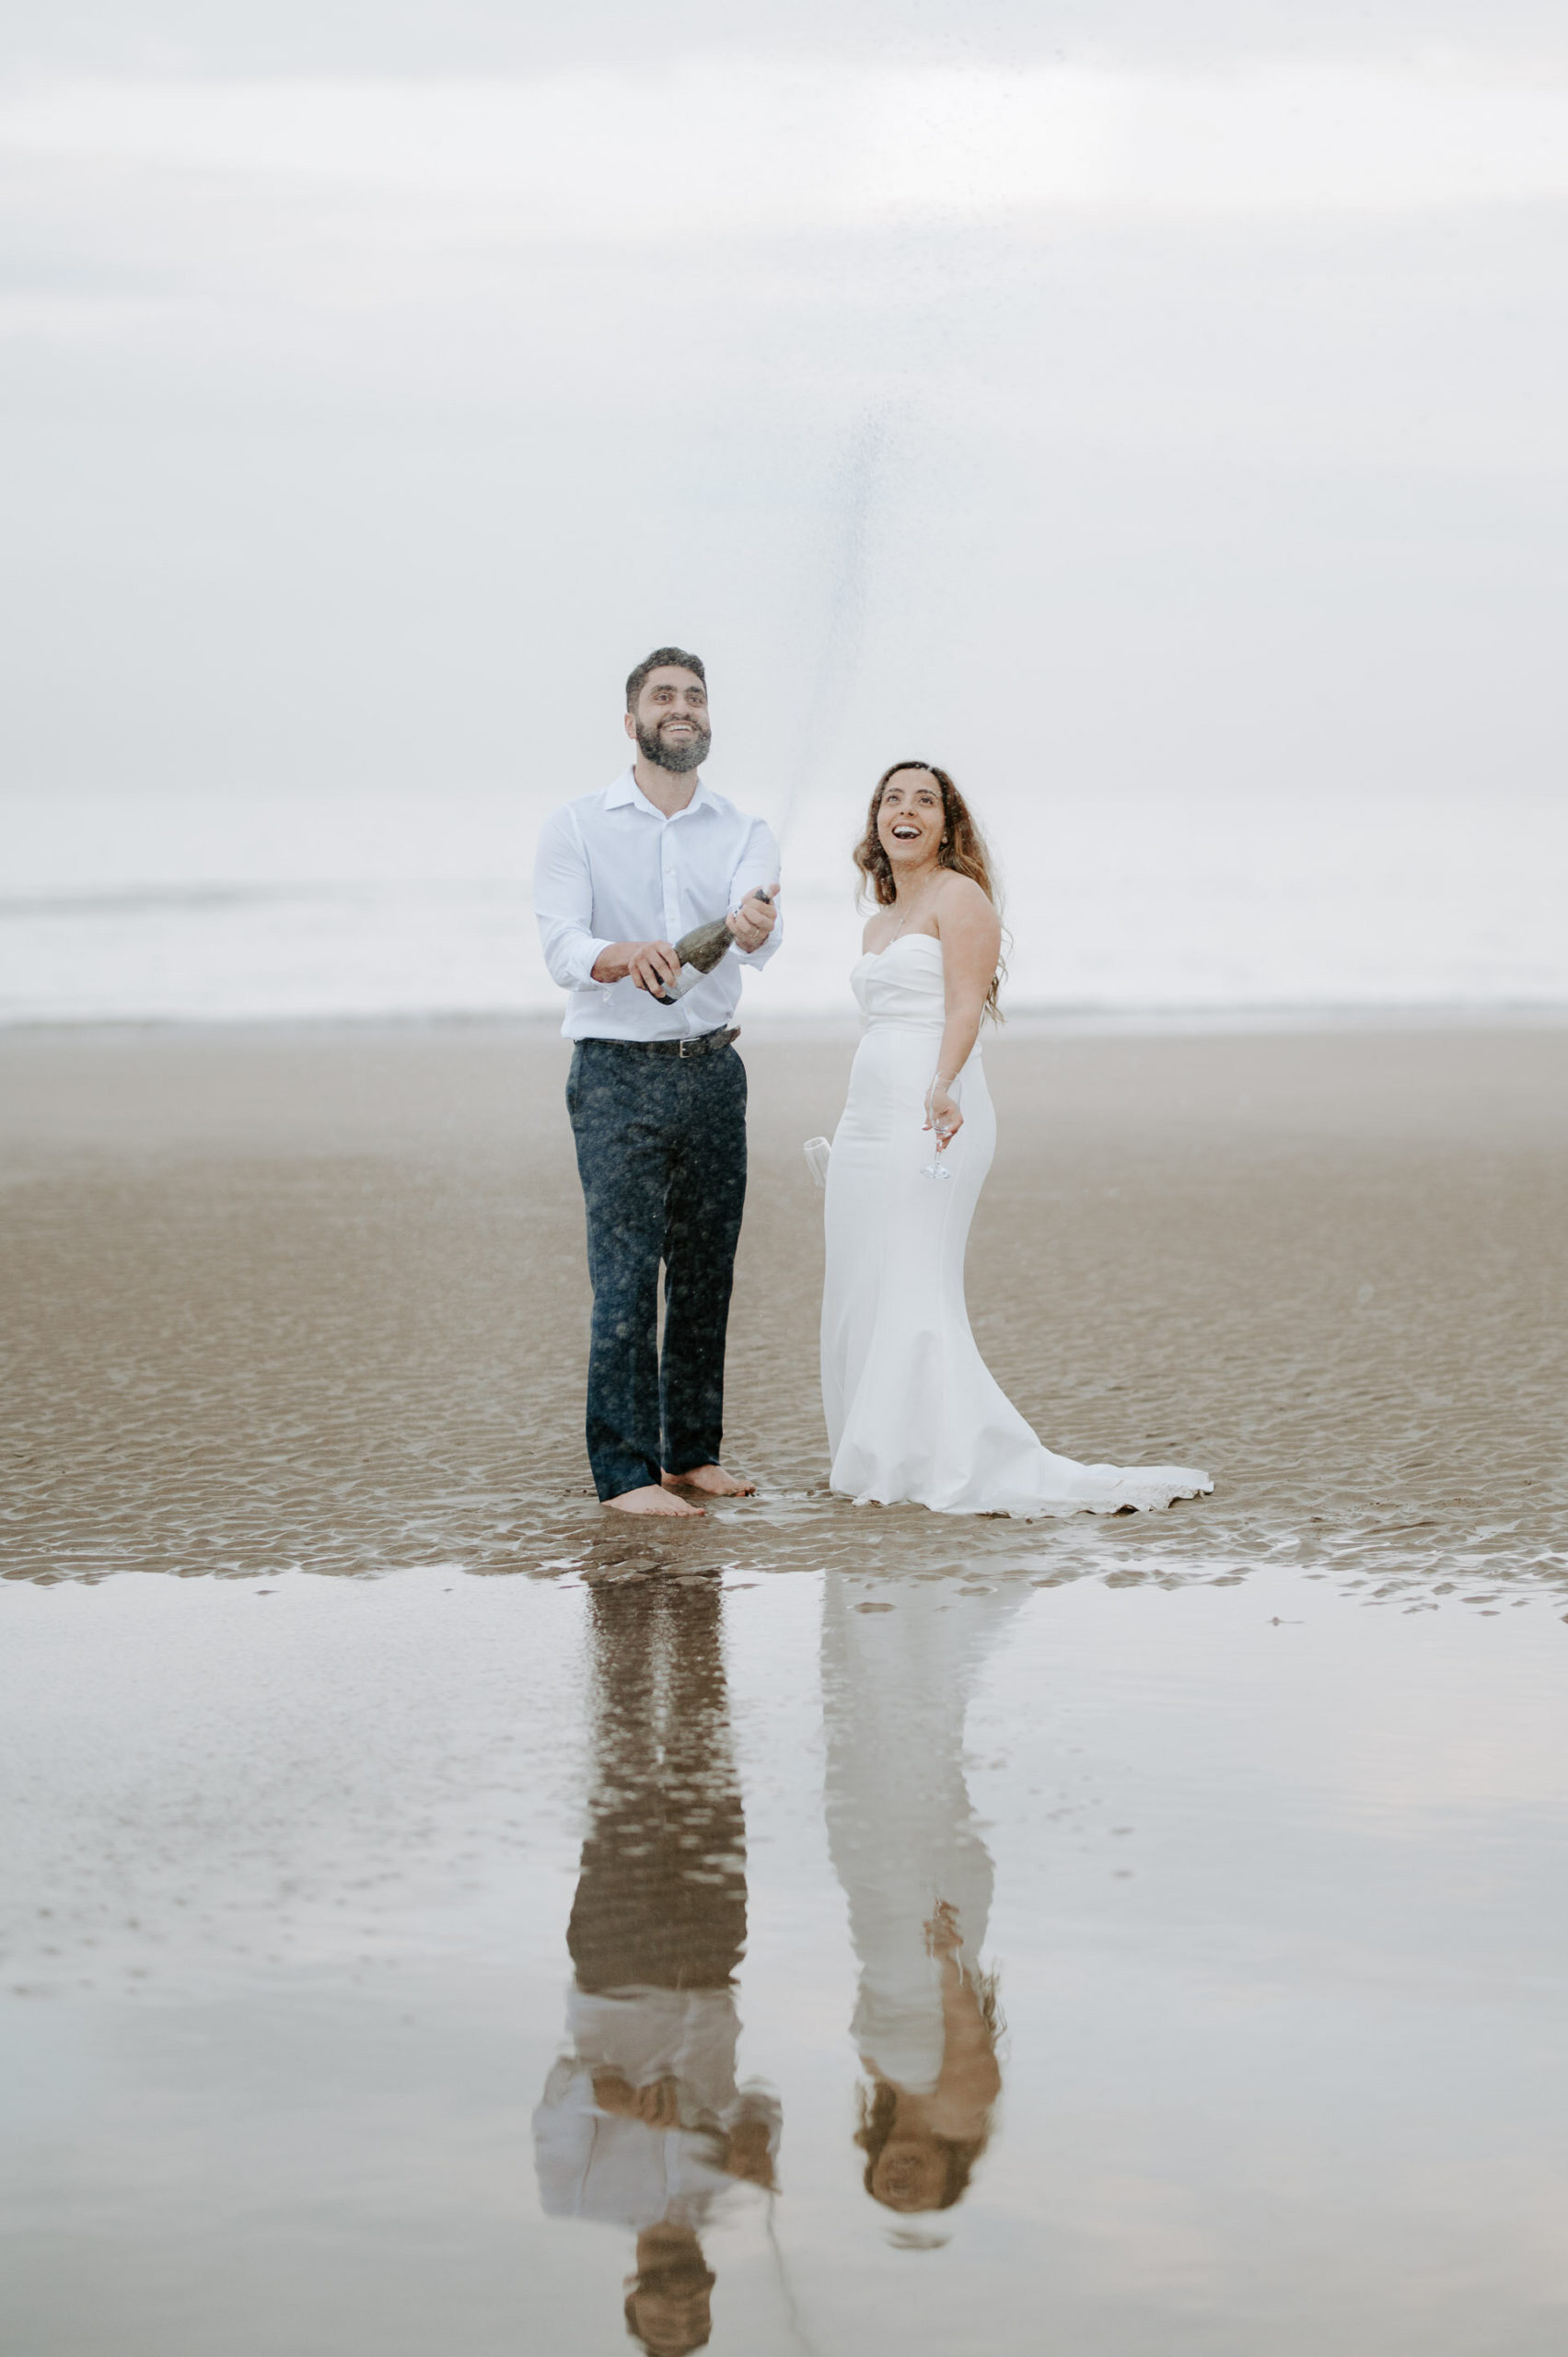 Demiana and Goergeuos - Camber Sands Golden Hour Beach Shoot - Laura Williams Photography-28.jpg